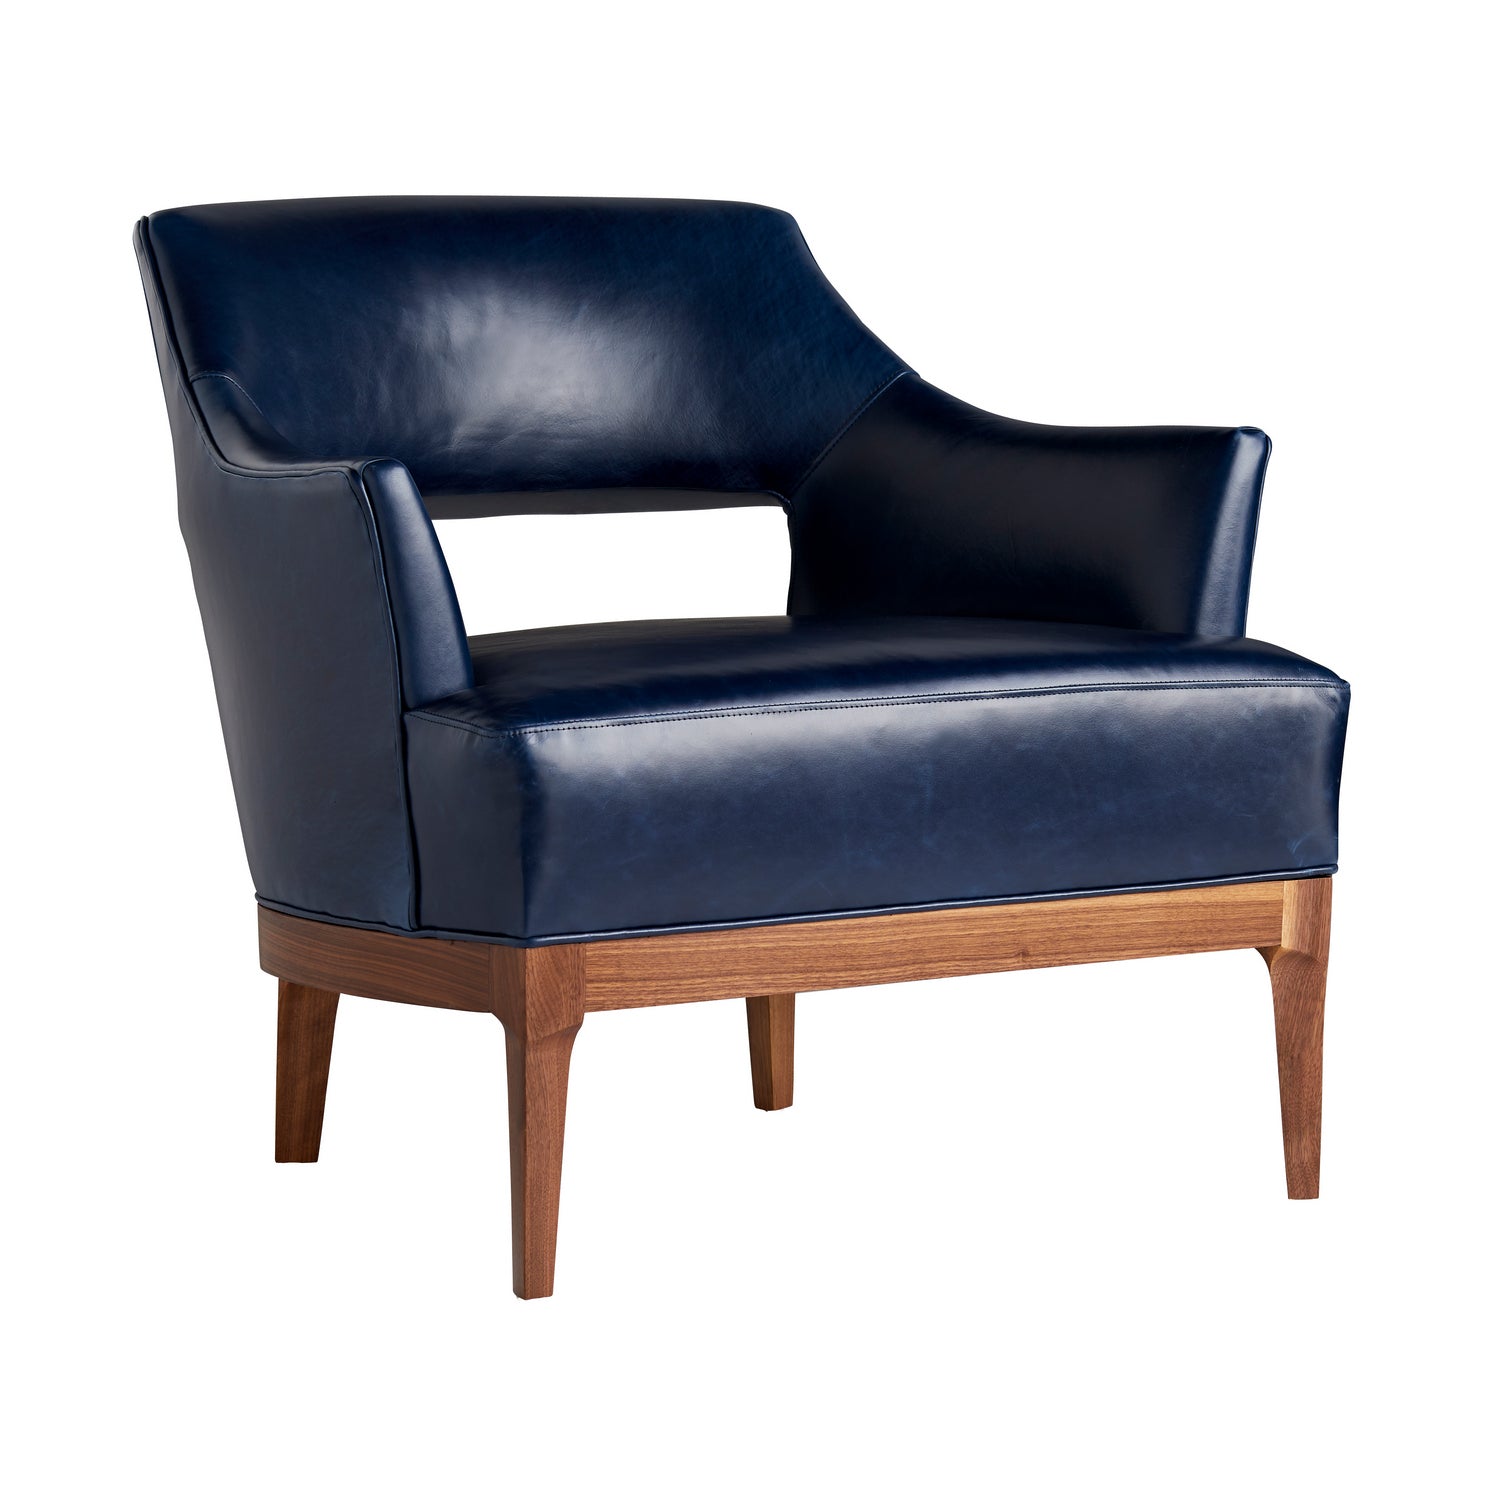 Upholstery - Chair from the Laurette collection